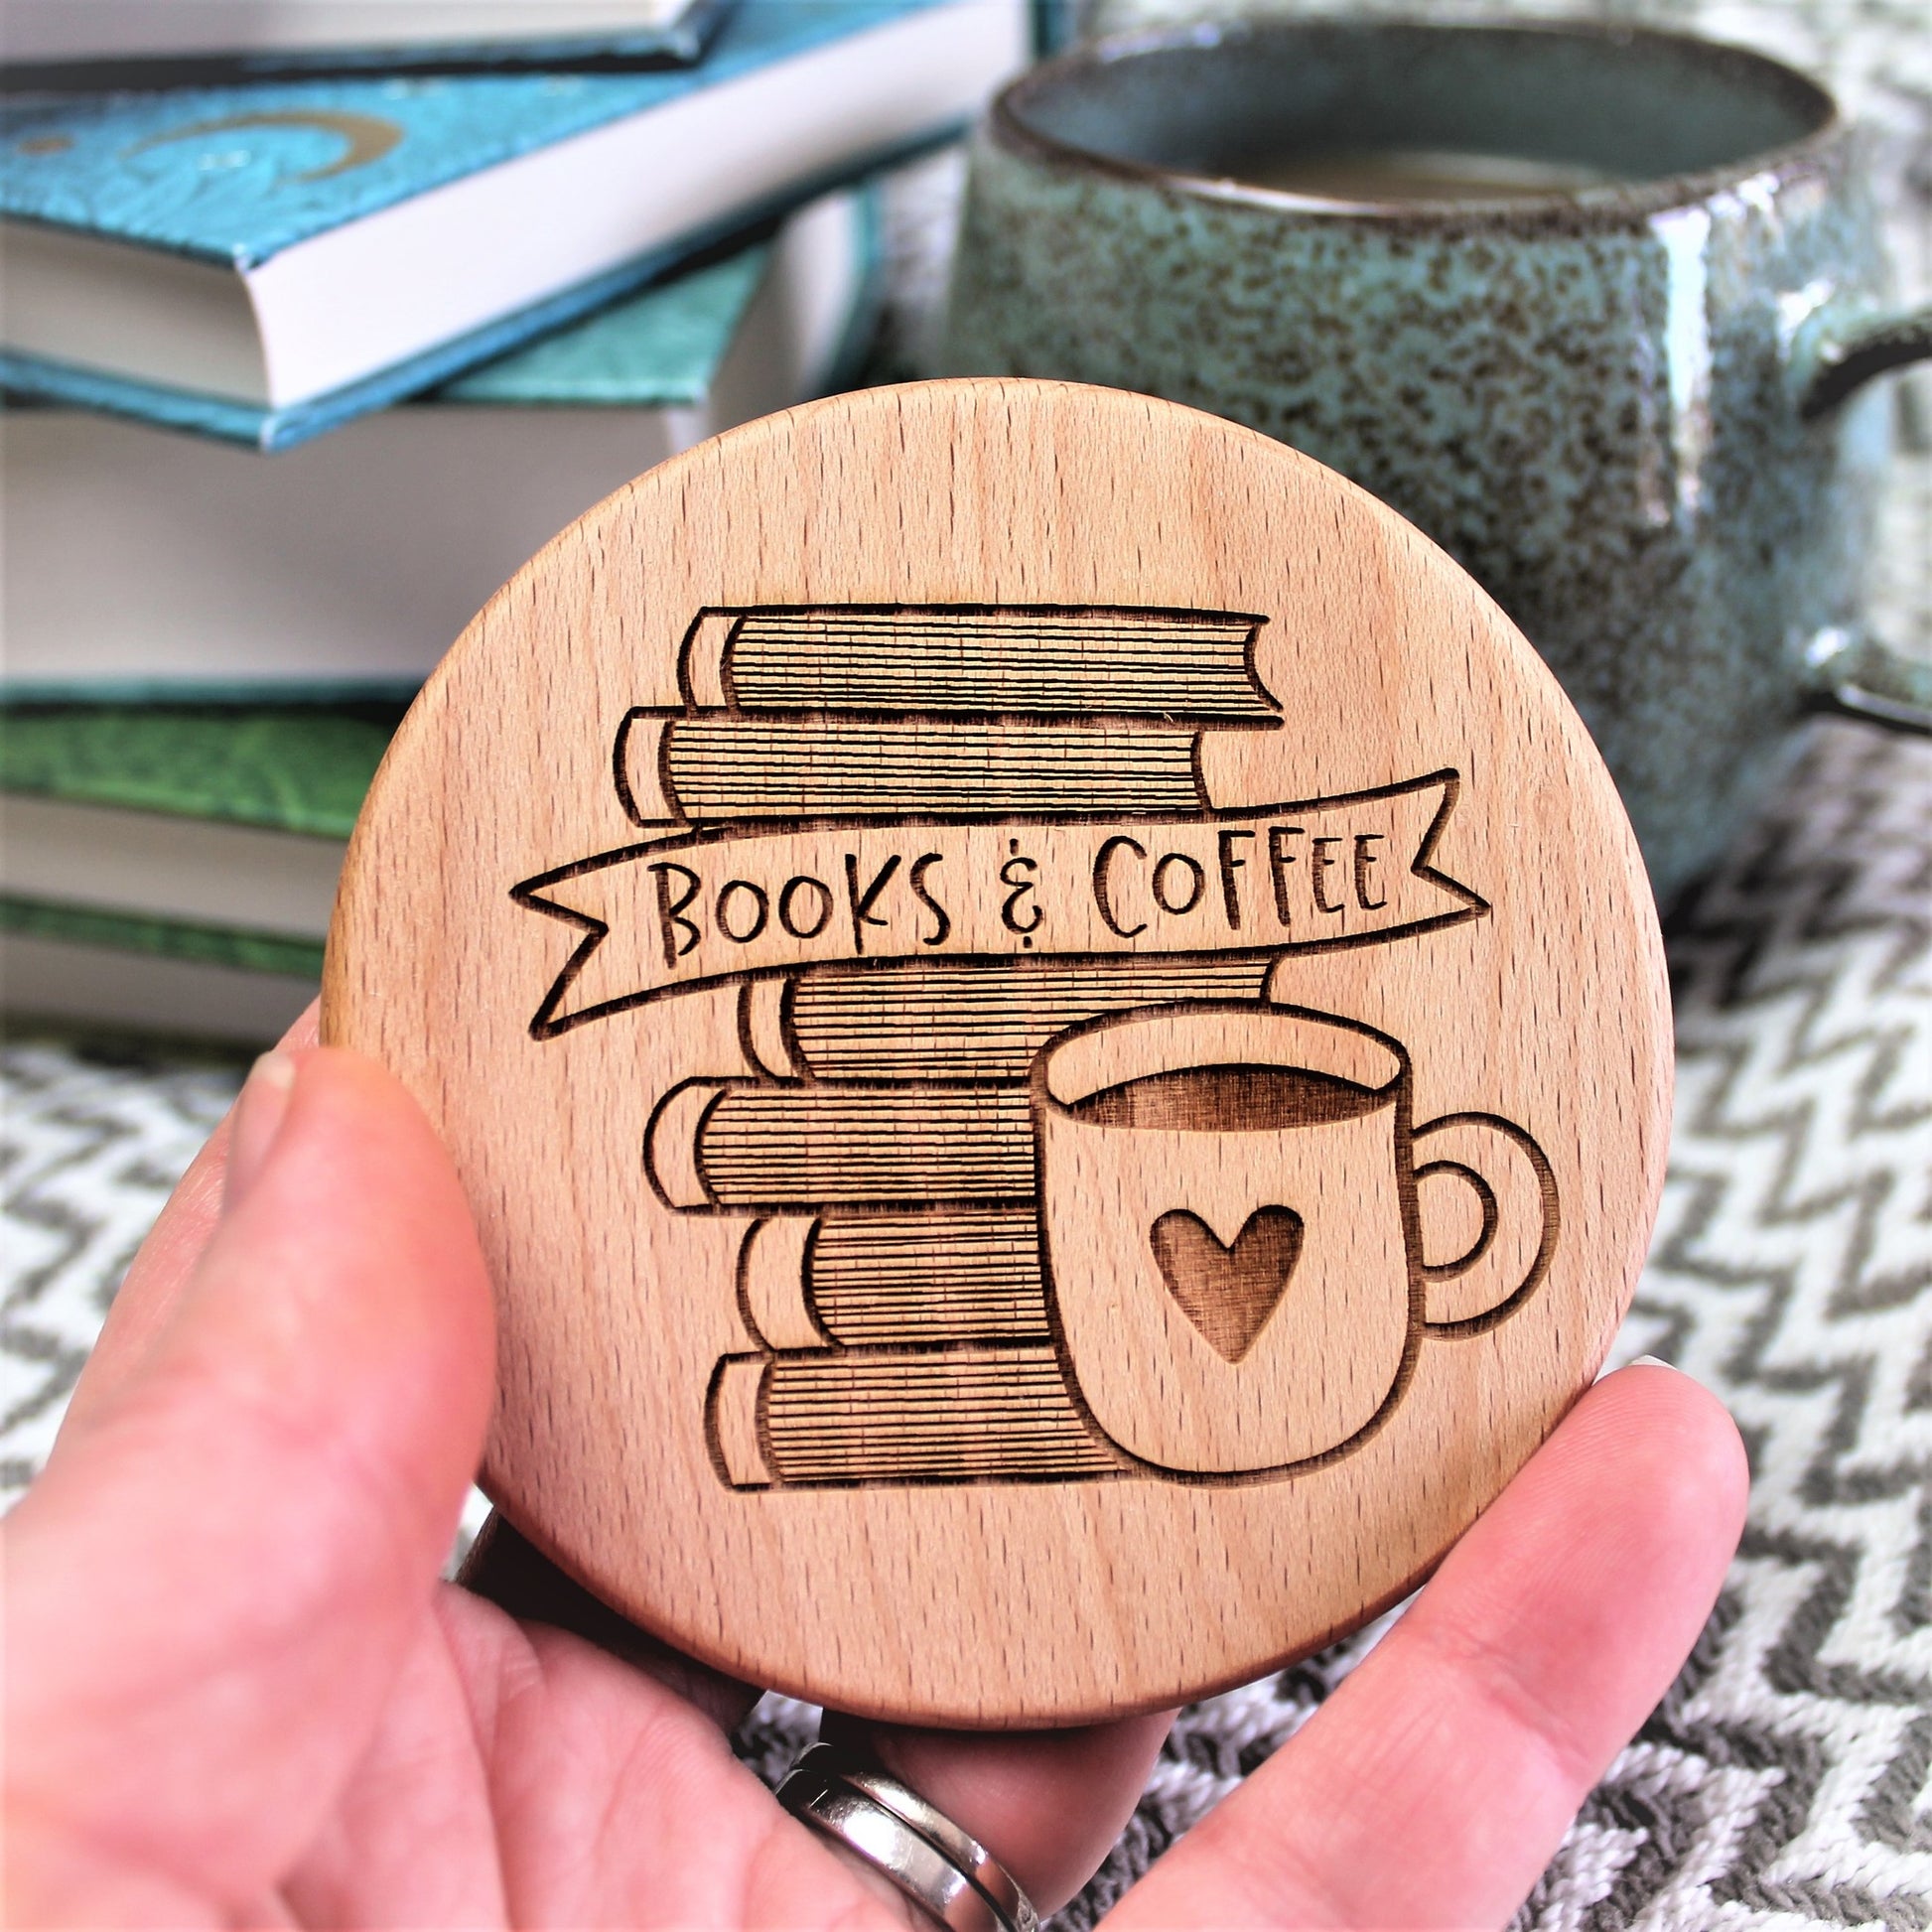 Books and coffee wooden engraved coaster 